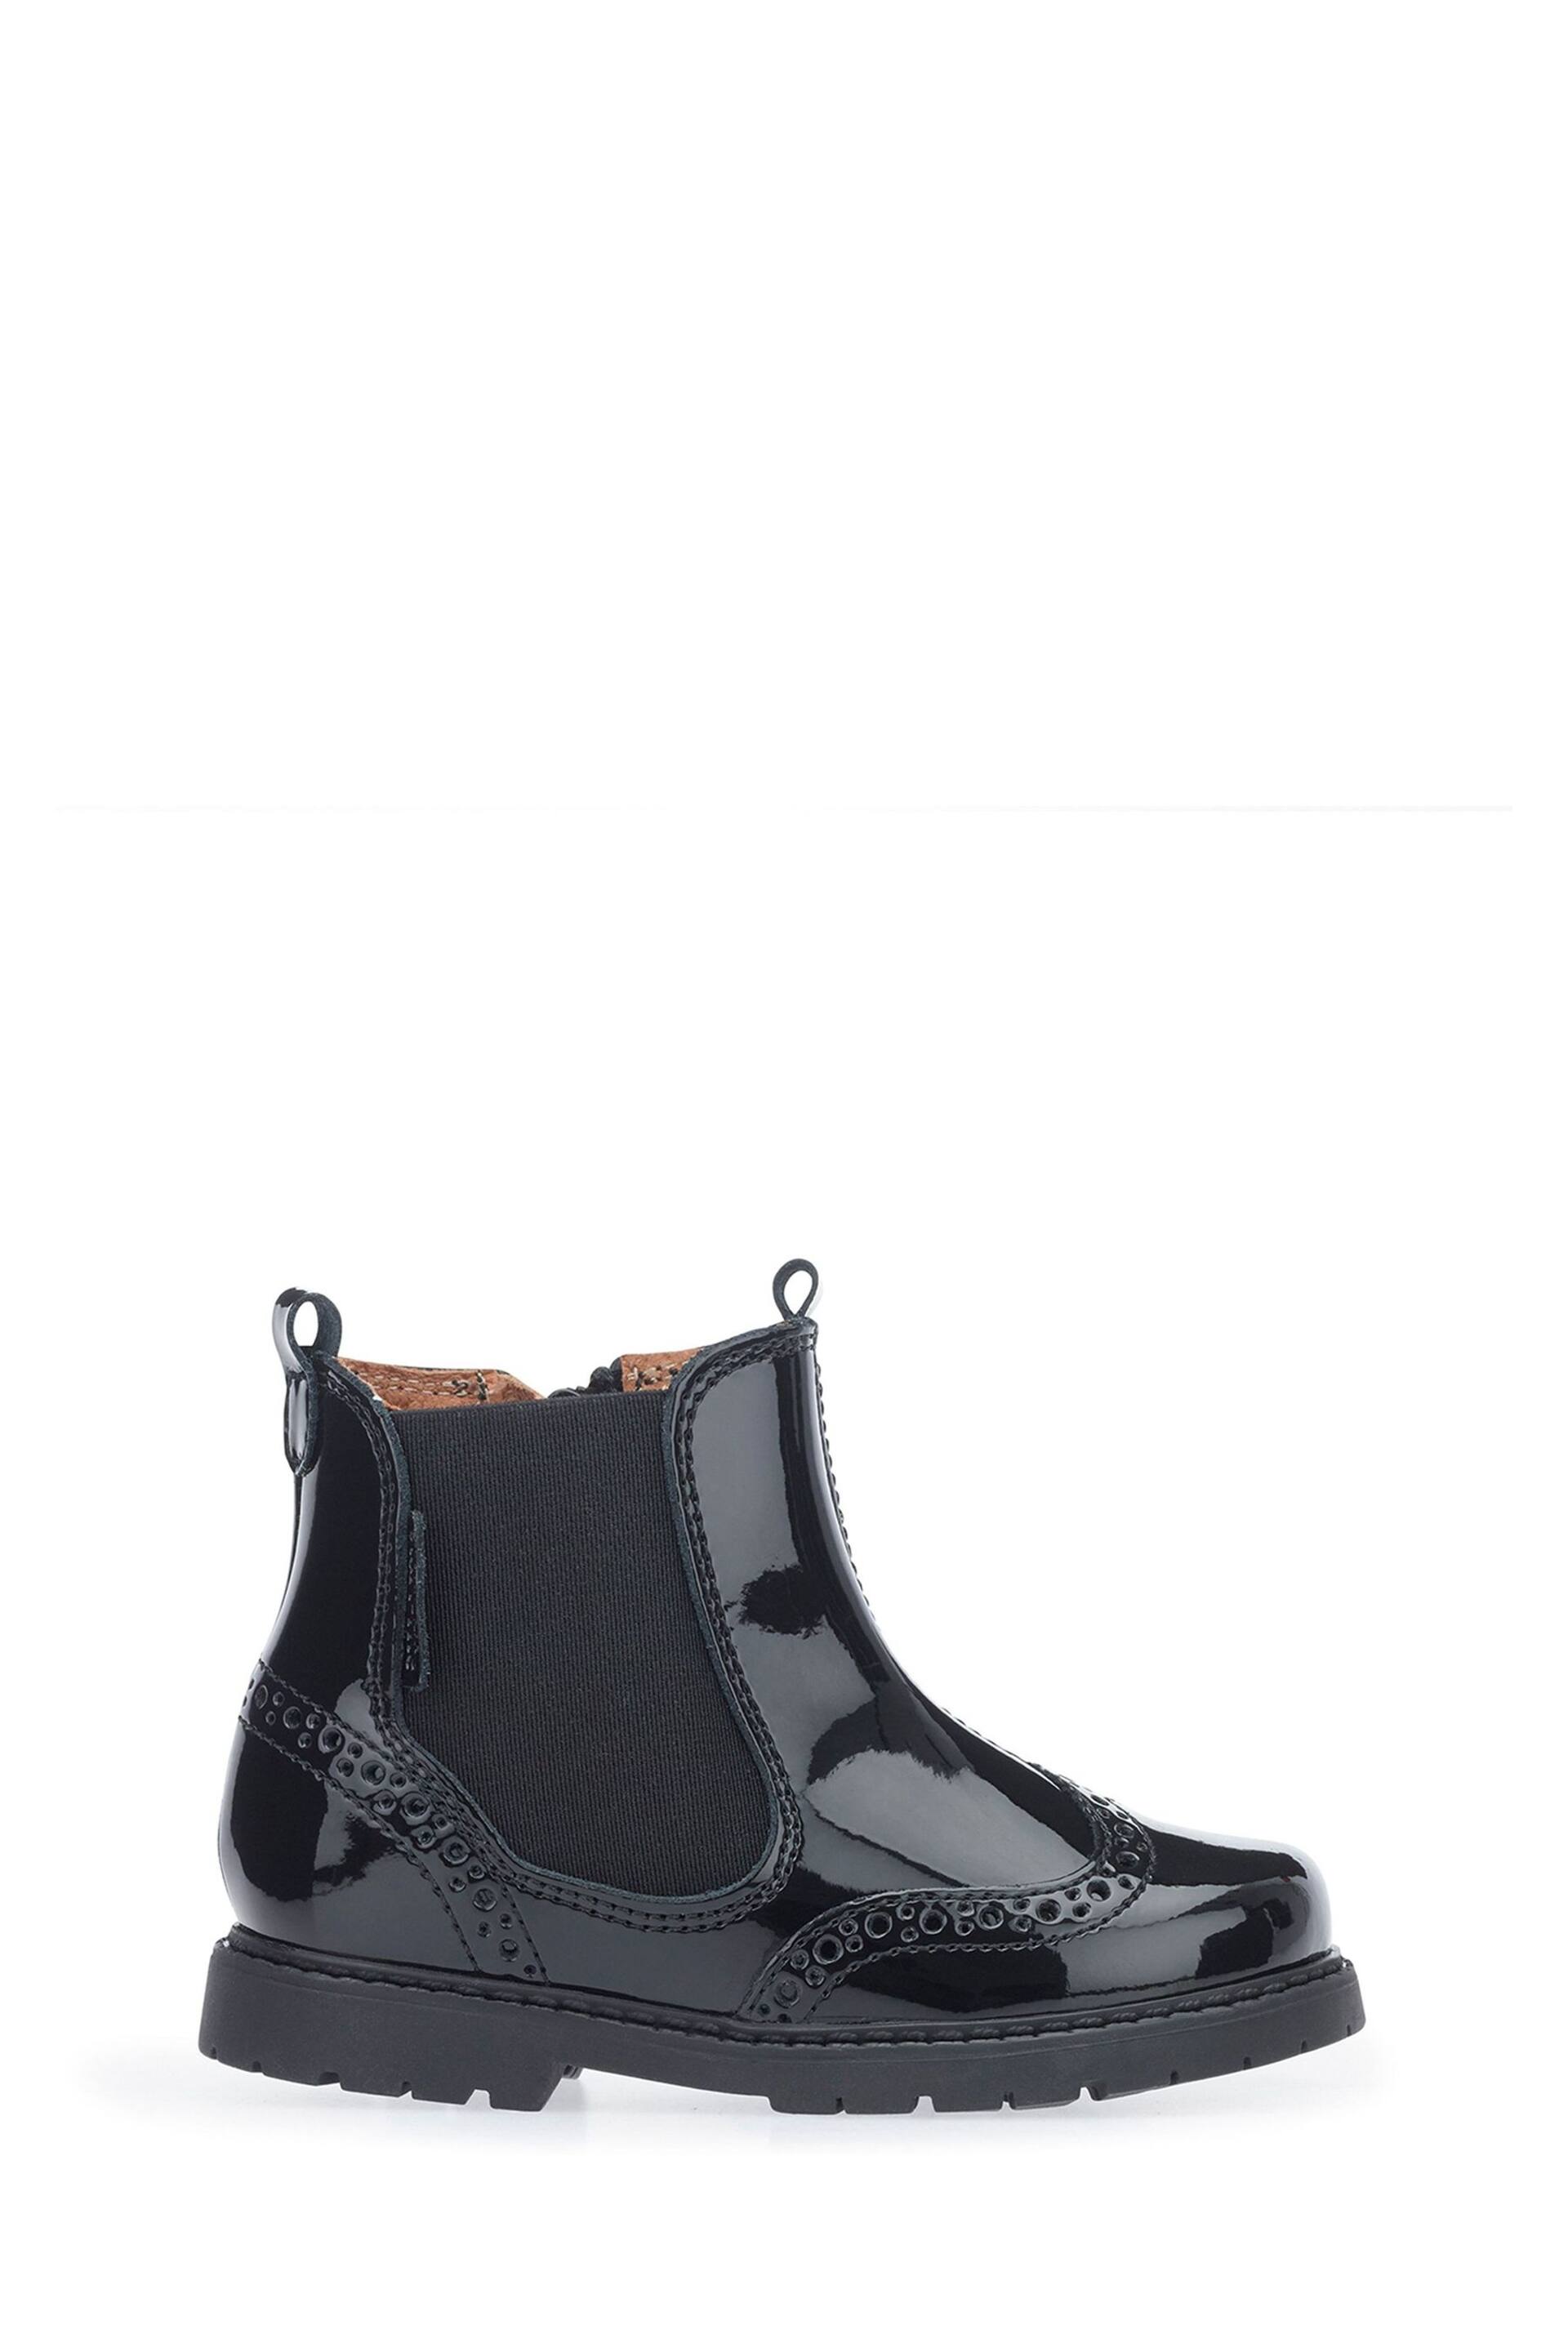 Start Rite Chelsea Black Patent Leather Black Zip Up Boots - Image 1 of 6